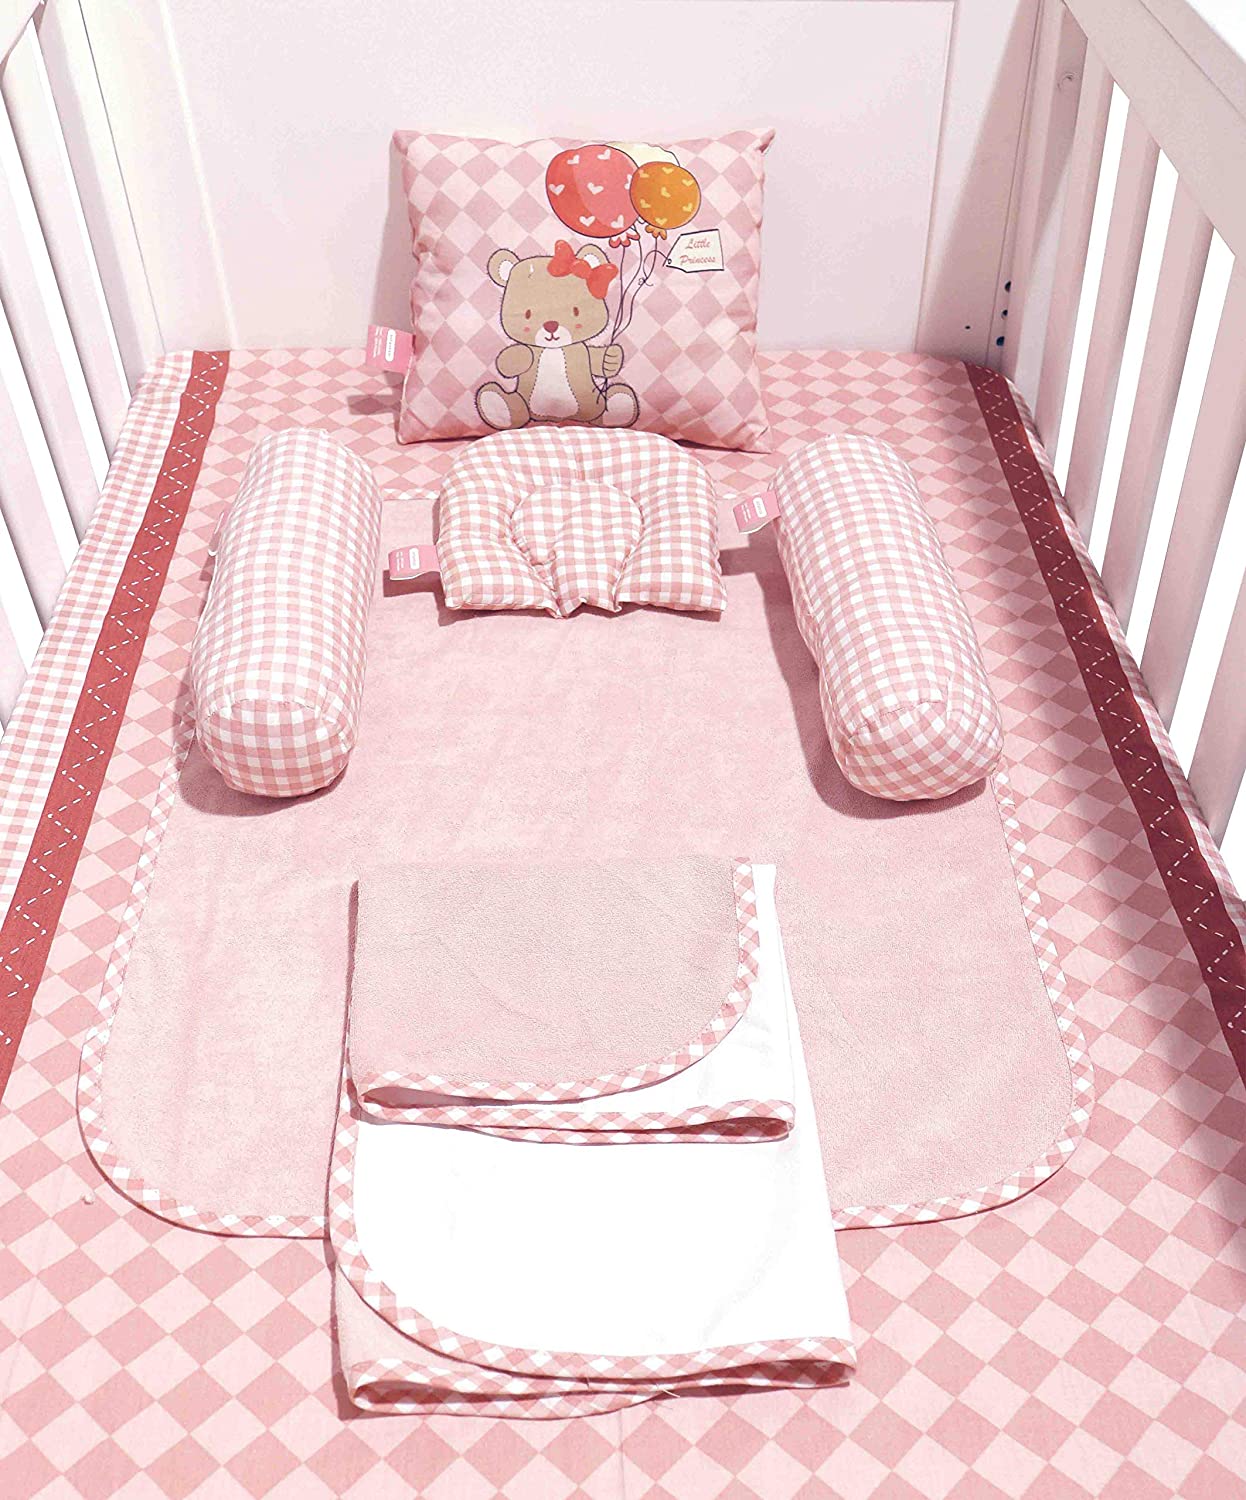 Why Is Crib Bedding Dangerous for Babies?